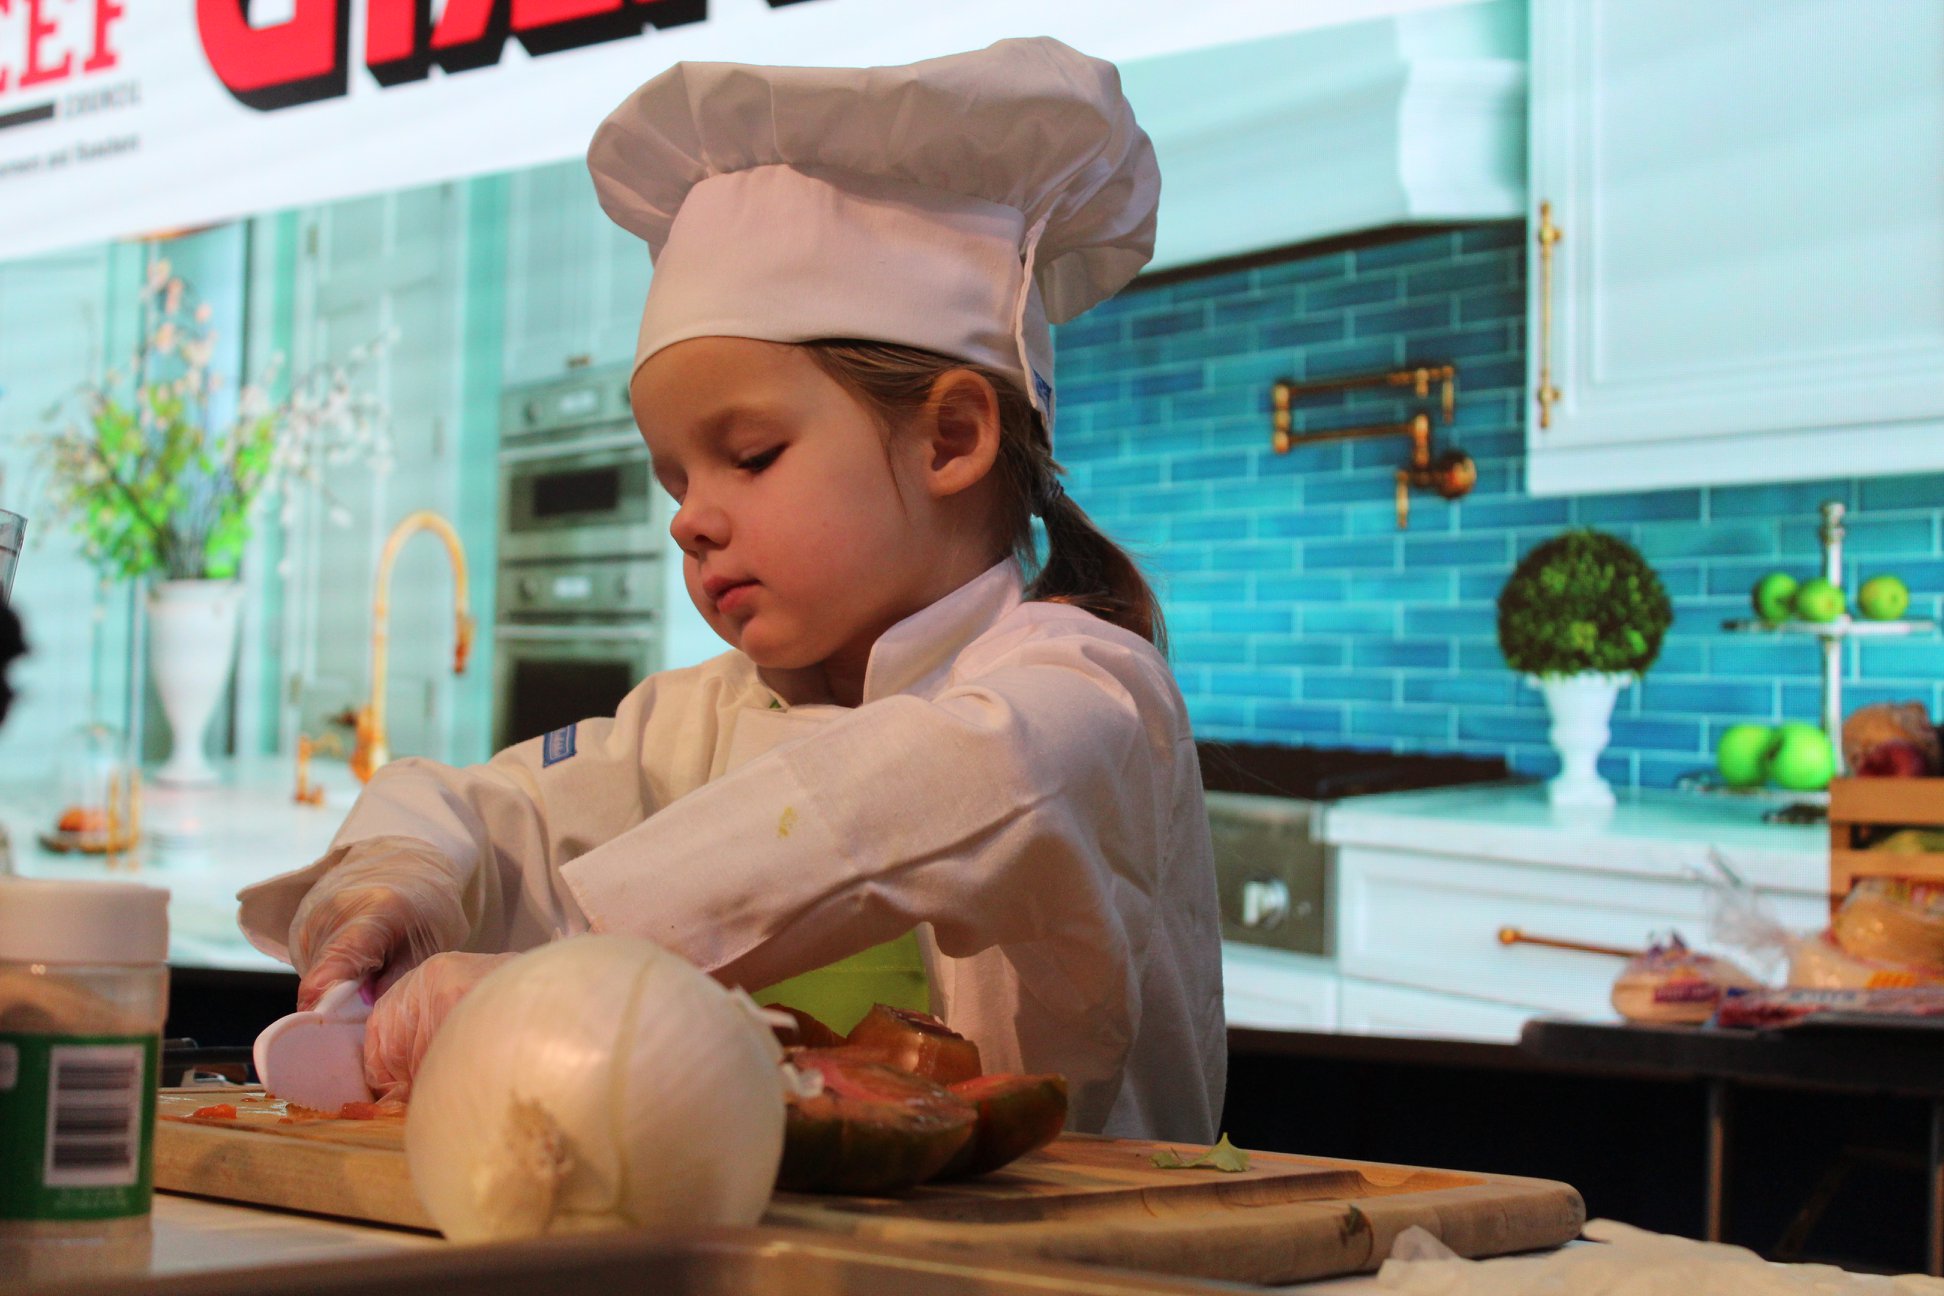 A young girl dressed as a chef and cooking at the 2020 Pennsylvania Farm Show.